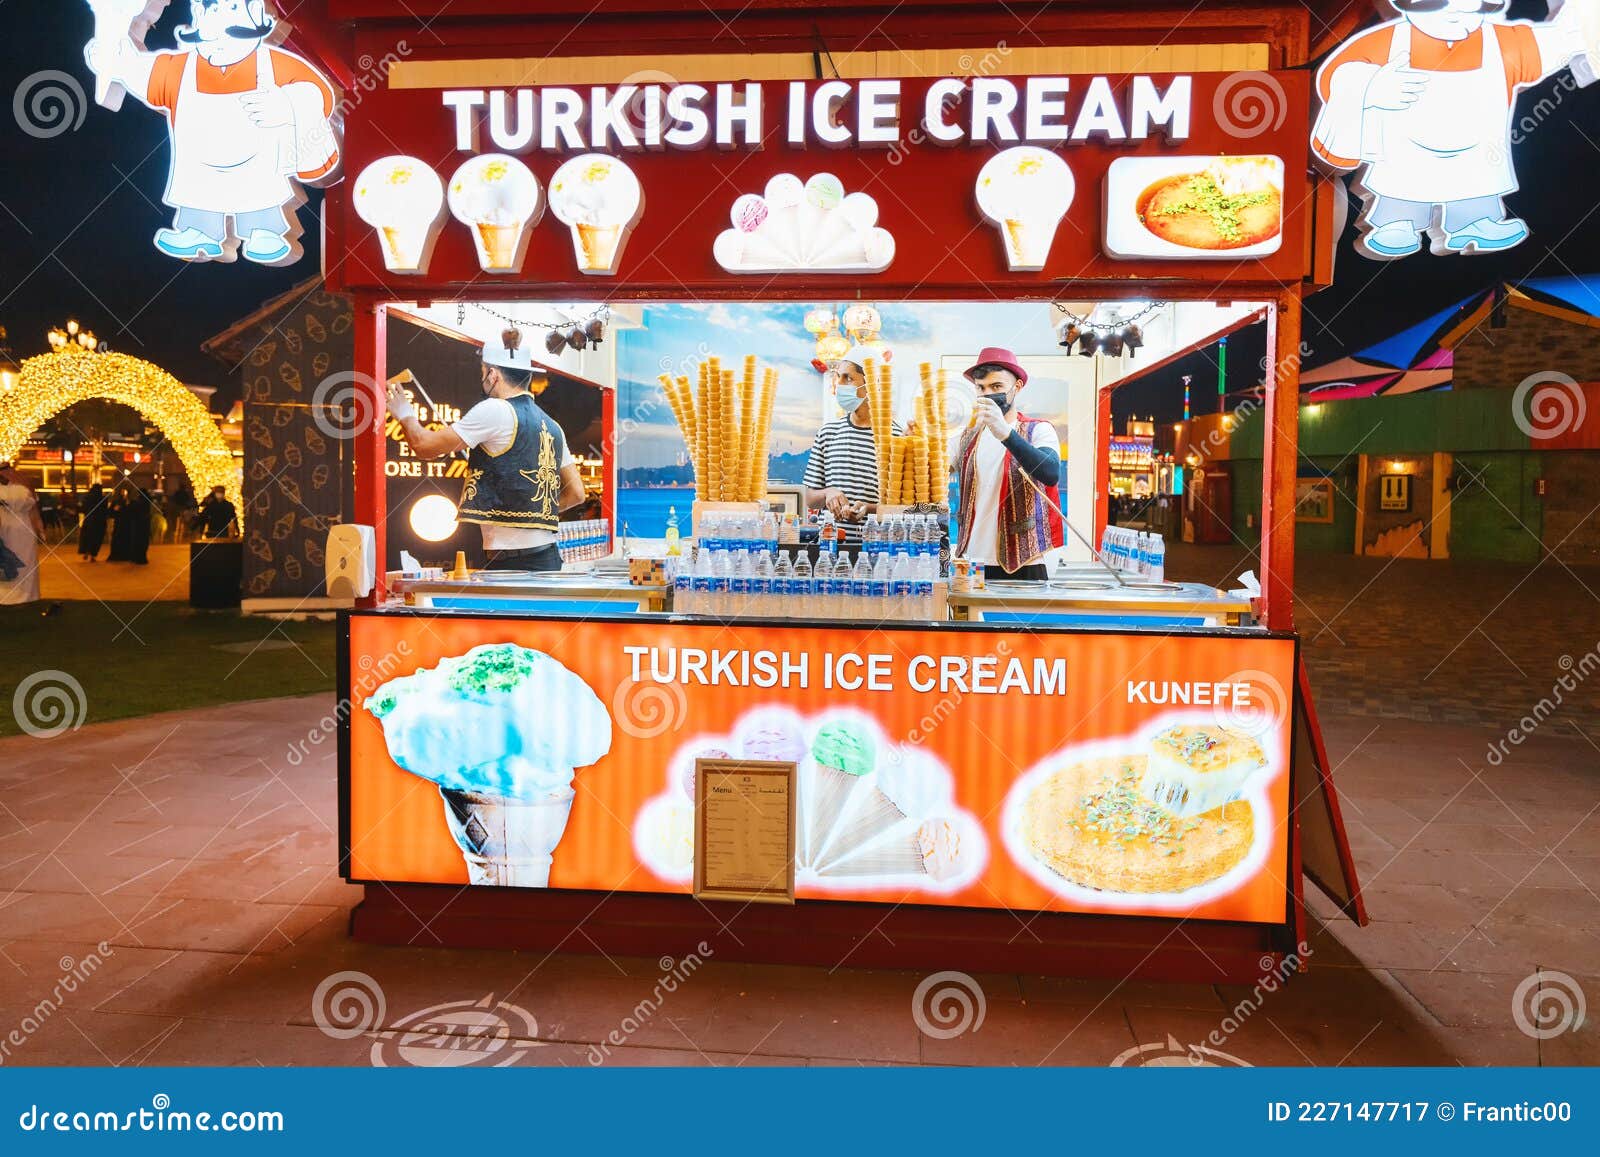 Shop Selling Turkish Ice Cream Famous for Its Funny Tricks and Jokes on  Customers Editorial Photography - Image of culture, dubai: 227147717